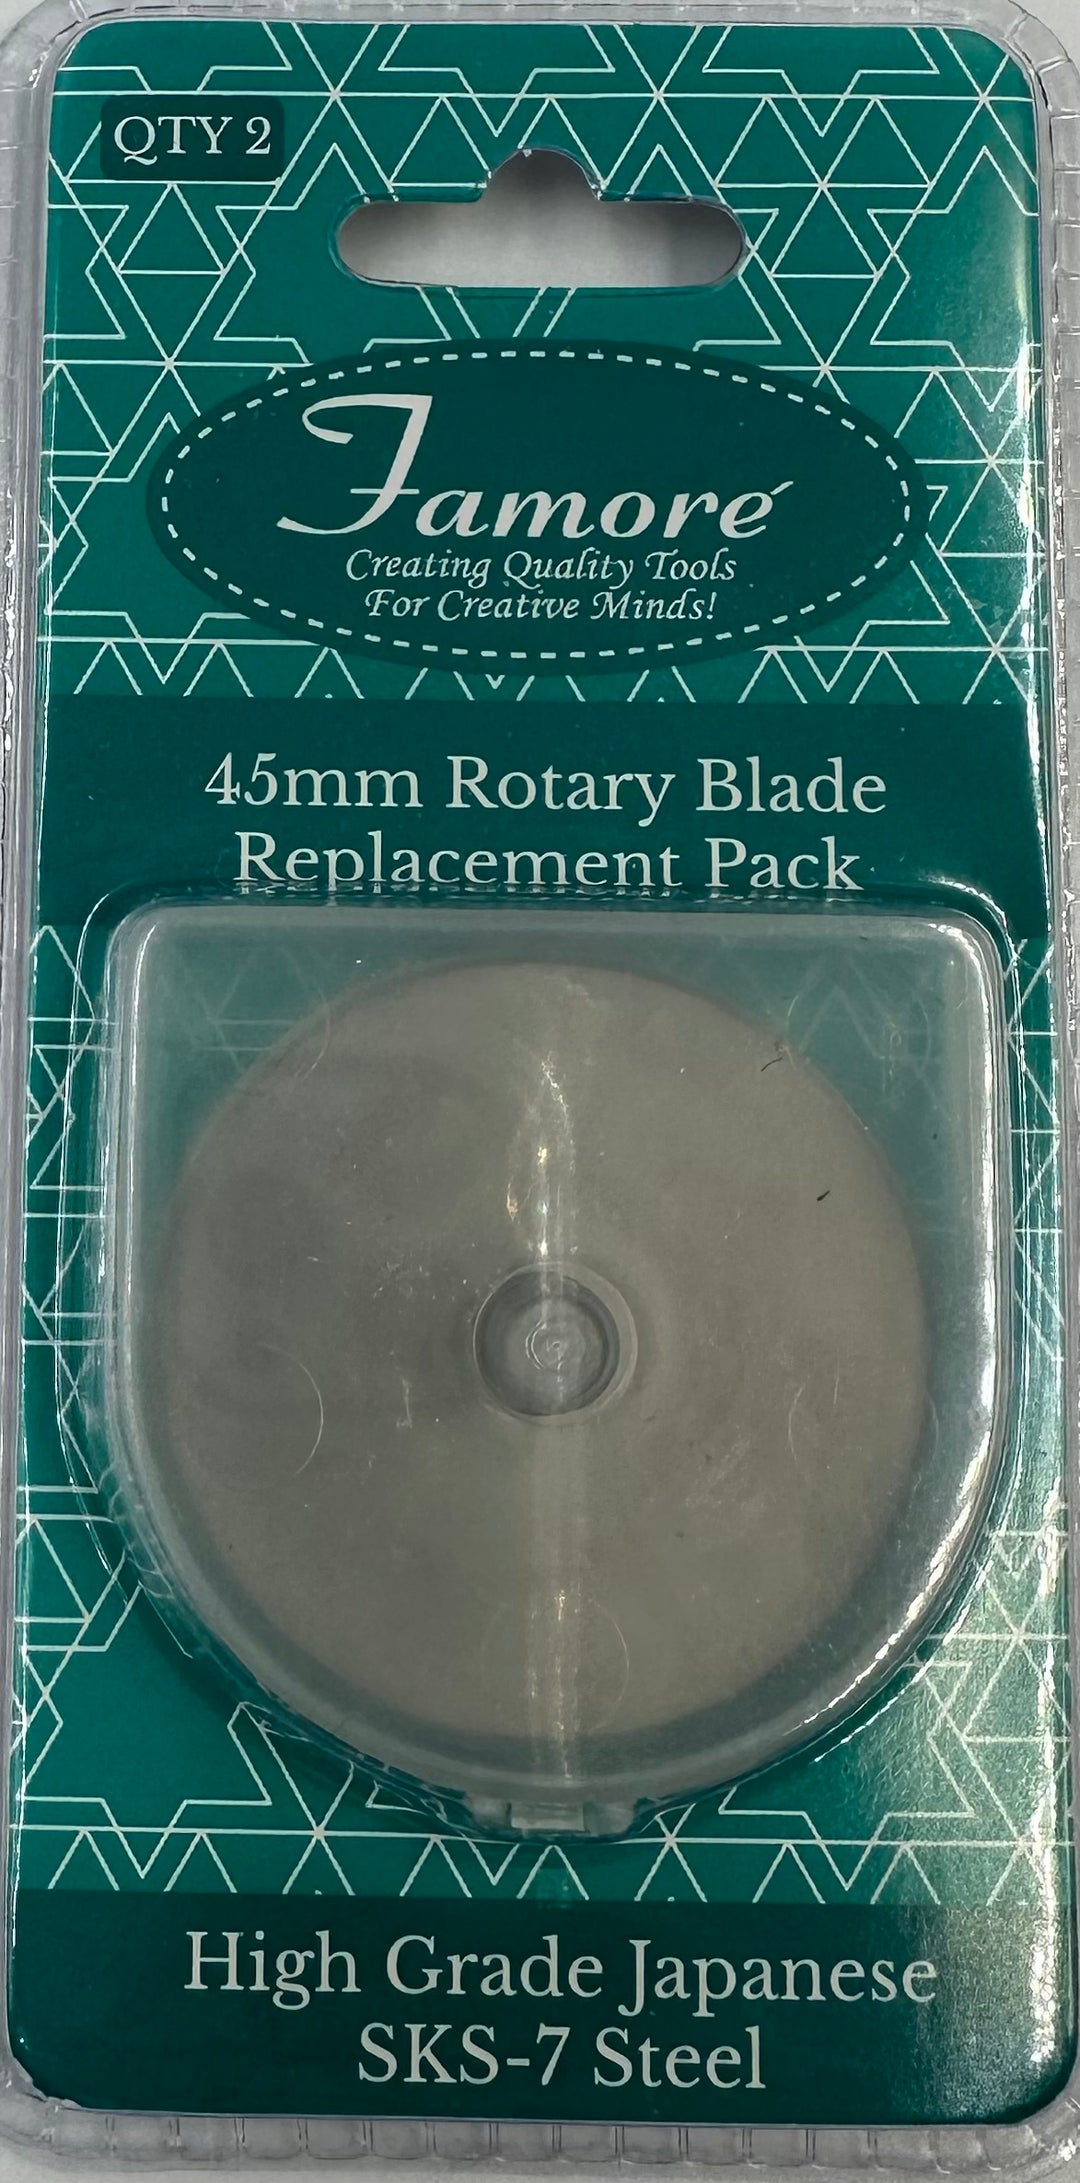 Famore' 45mm Rotary Blade Replacement Pack